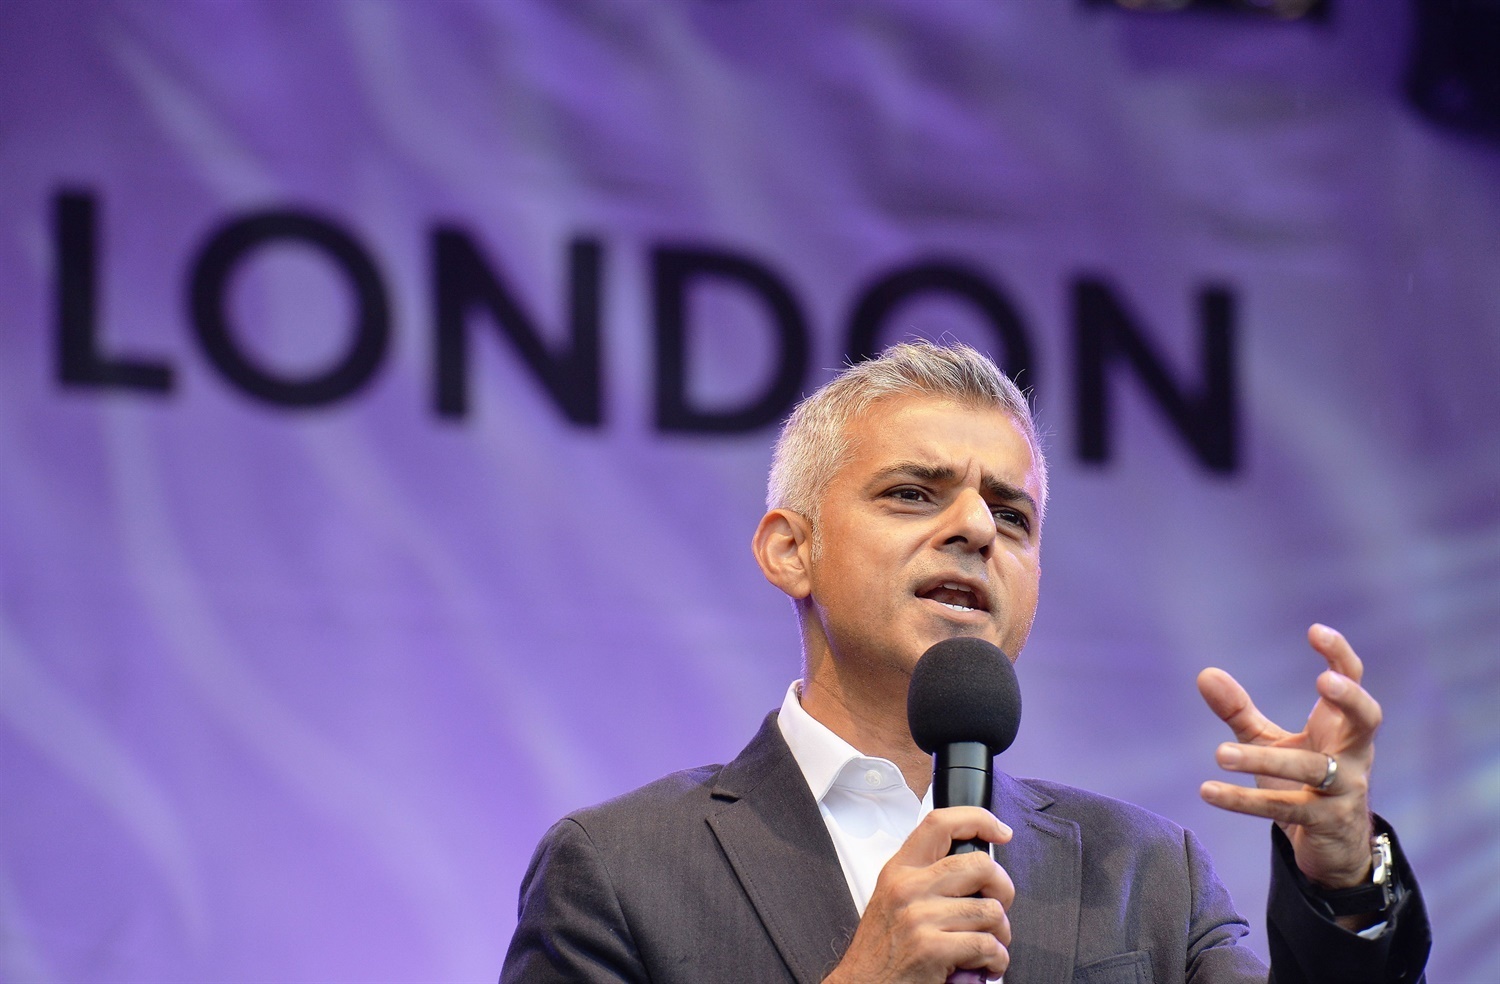 Khan urges national fare freeze as TfL tickets to stay the same in 2018